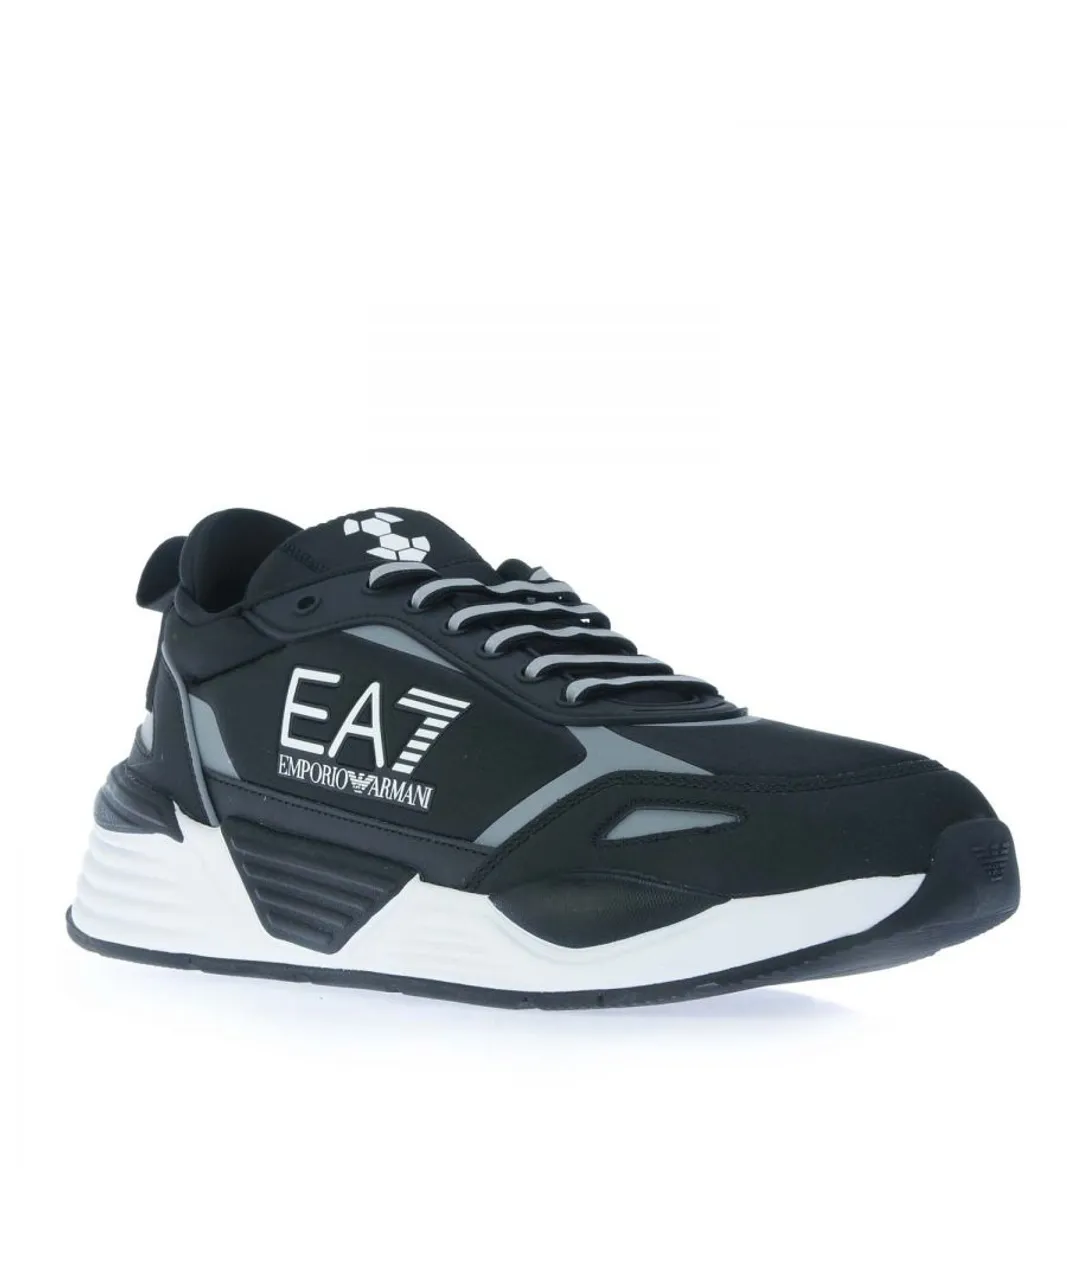 EA7 Mens Emporio Armani Ace Runner Neoprene Shoes in Black Leather (archived)